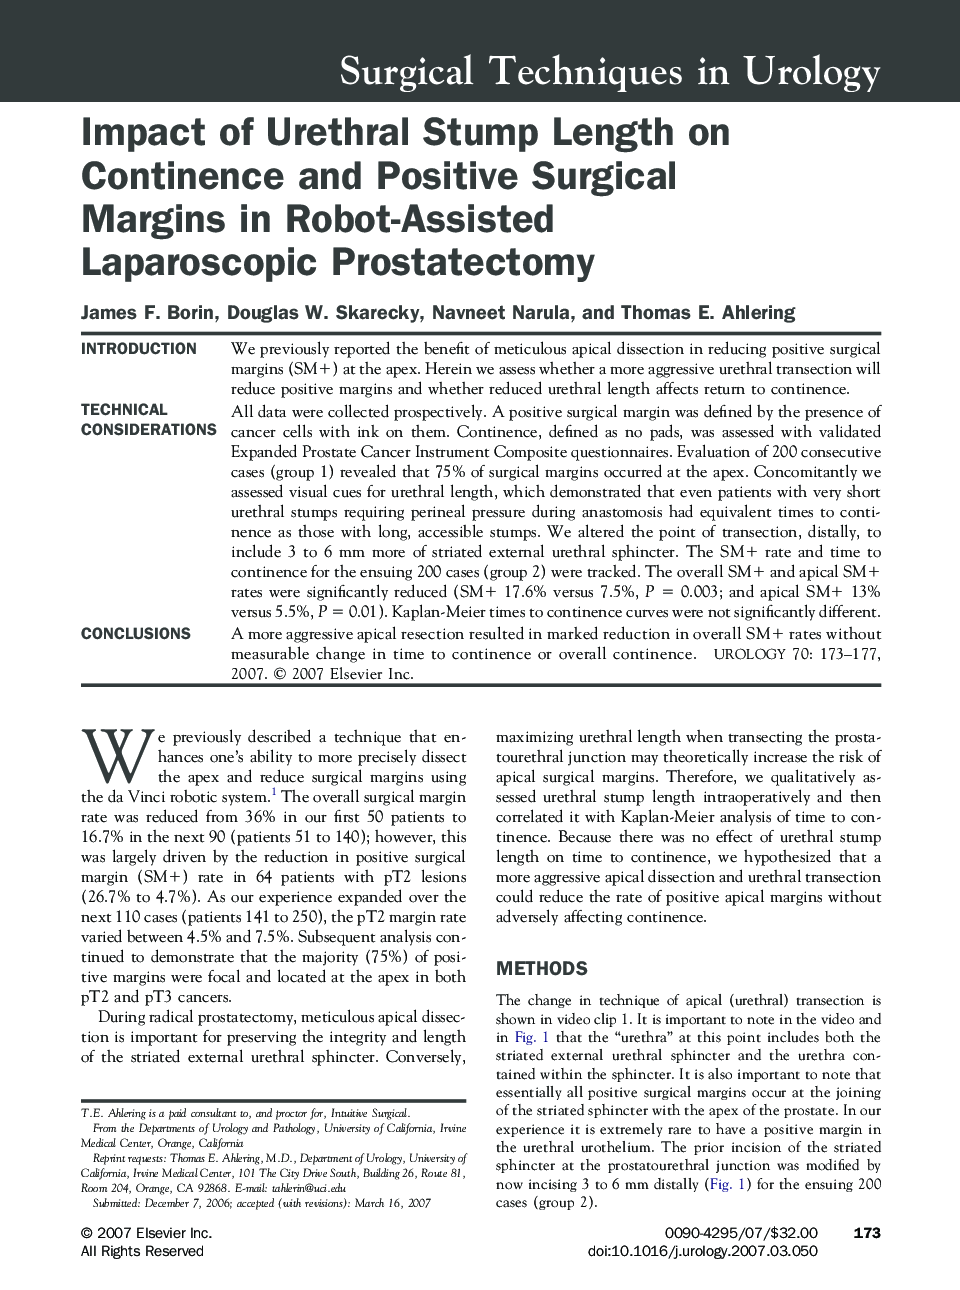 Impact of Urethral Stump Length on Continence and Positive Surgical Margins in Robot-Assisted Laparoscopic Prostatectomy